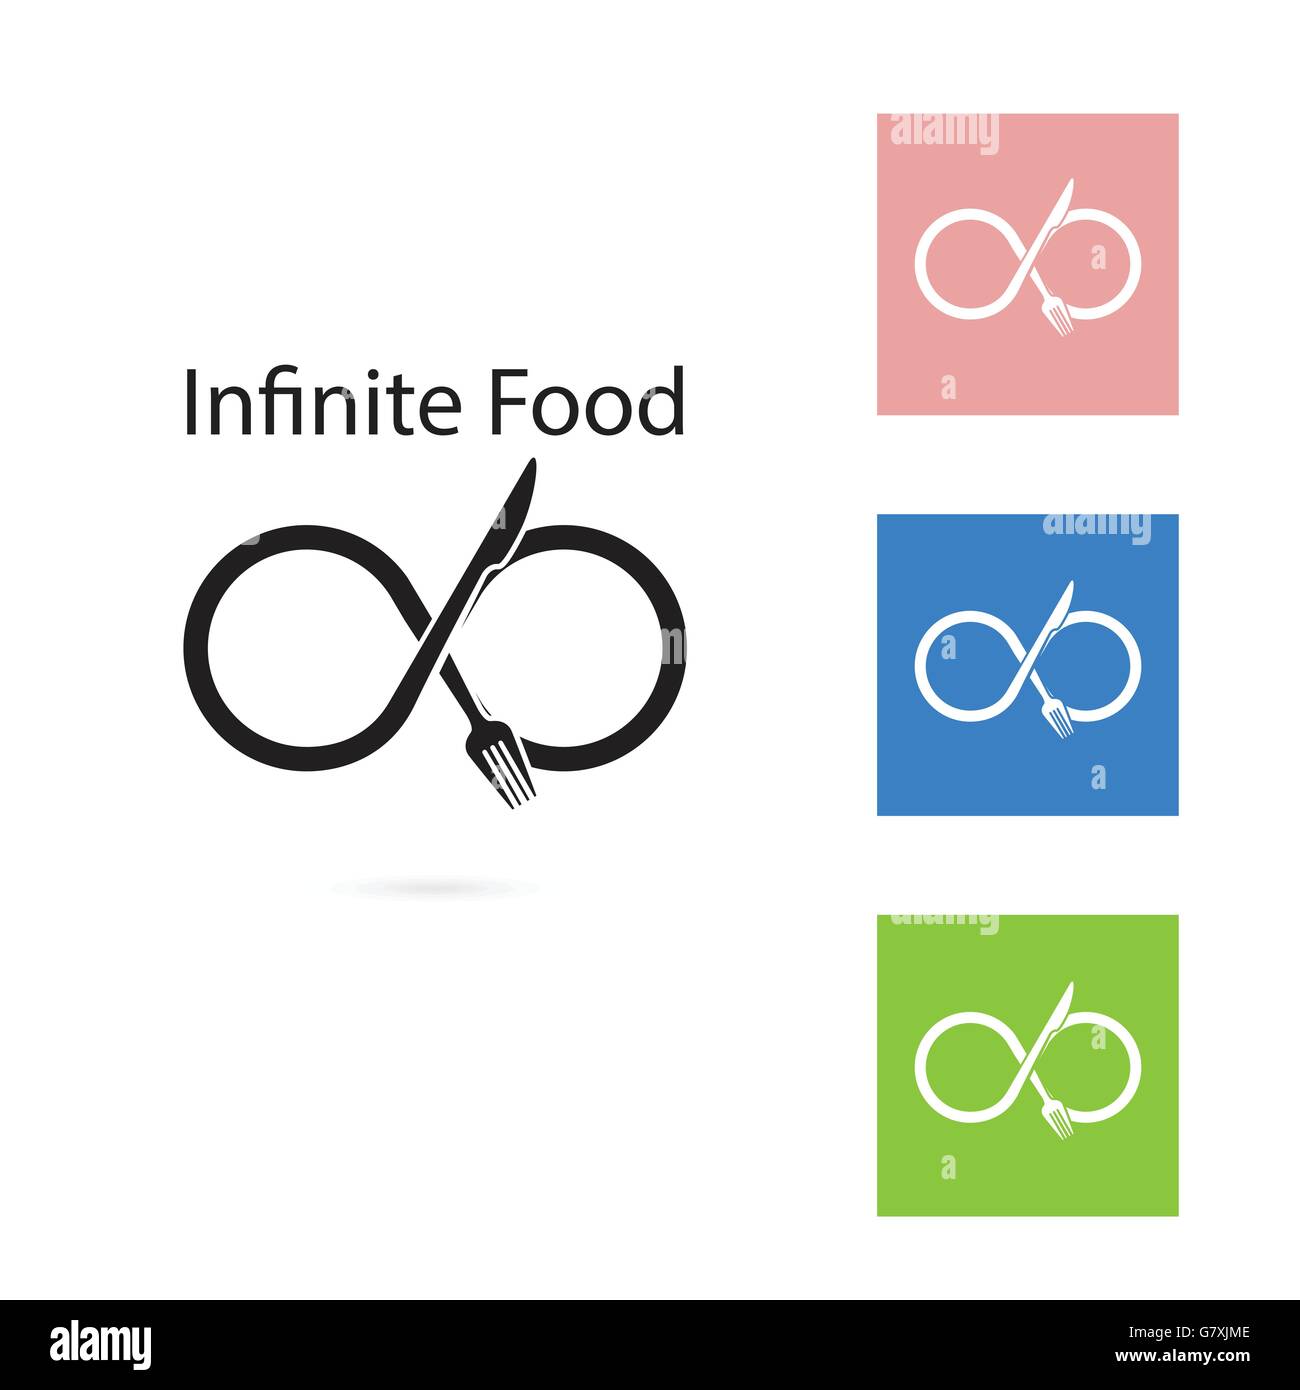 Fork and knife logo elements design.Food and infinity icon.Food and drink concept.Vector illustration. Stock Vector